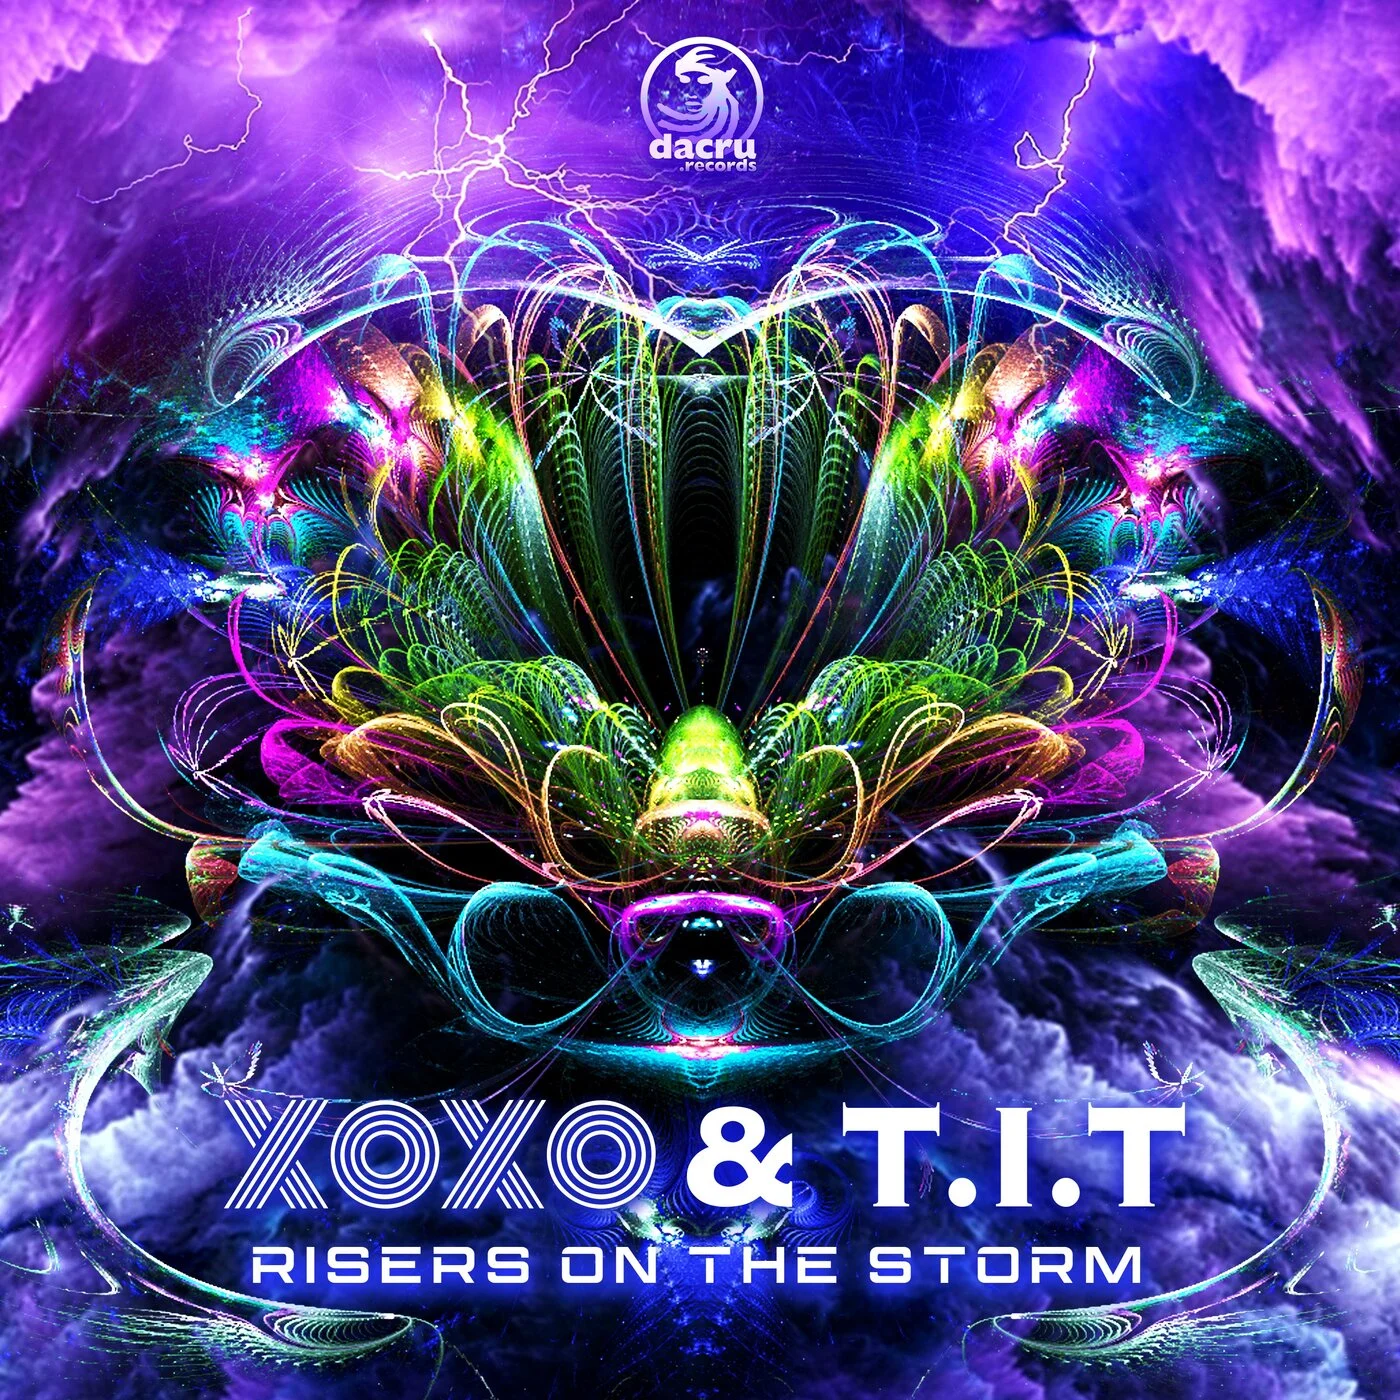 Xoxo & T.I.T - Risers On The Storm